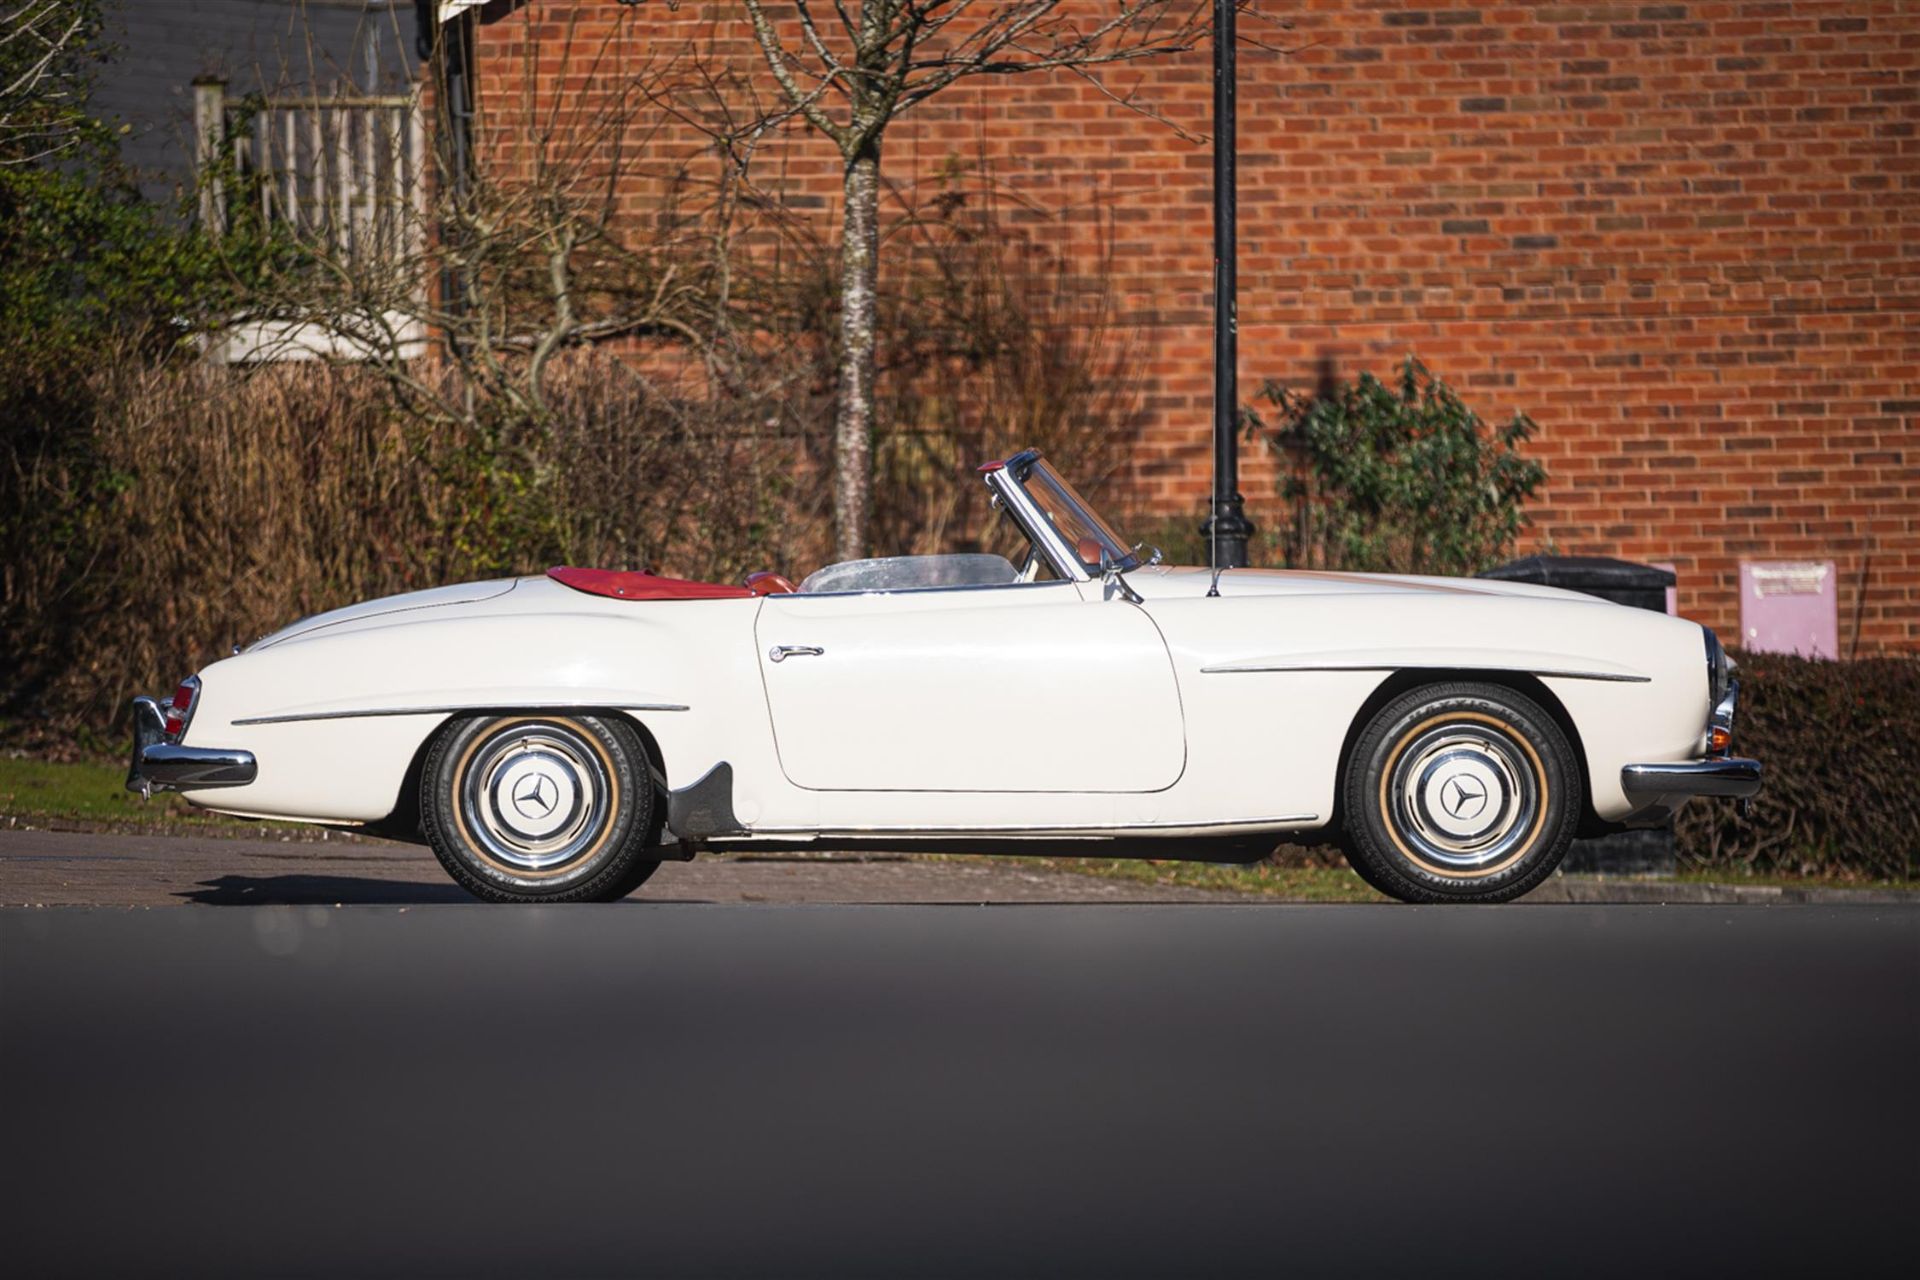 1962 Mercedes-Benz 190 SL with Hardtop - Right-Hand Drive - Image 14 of 19